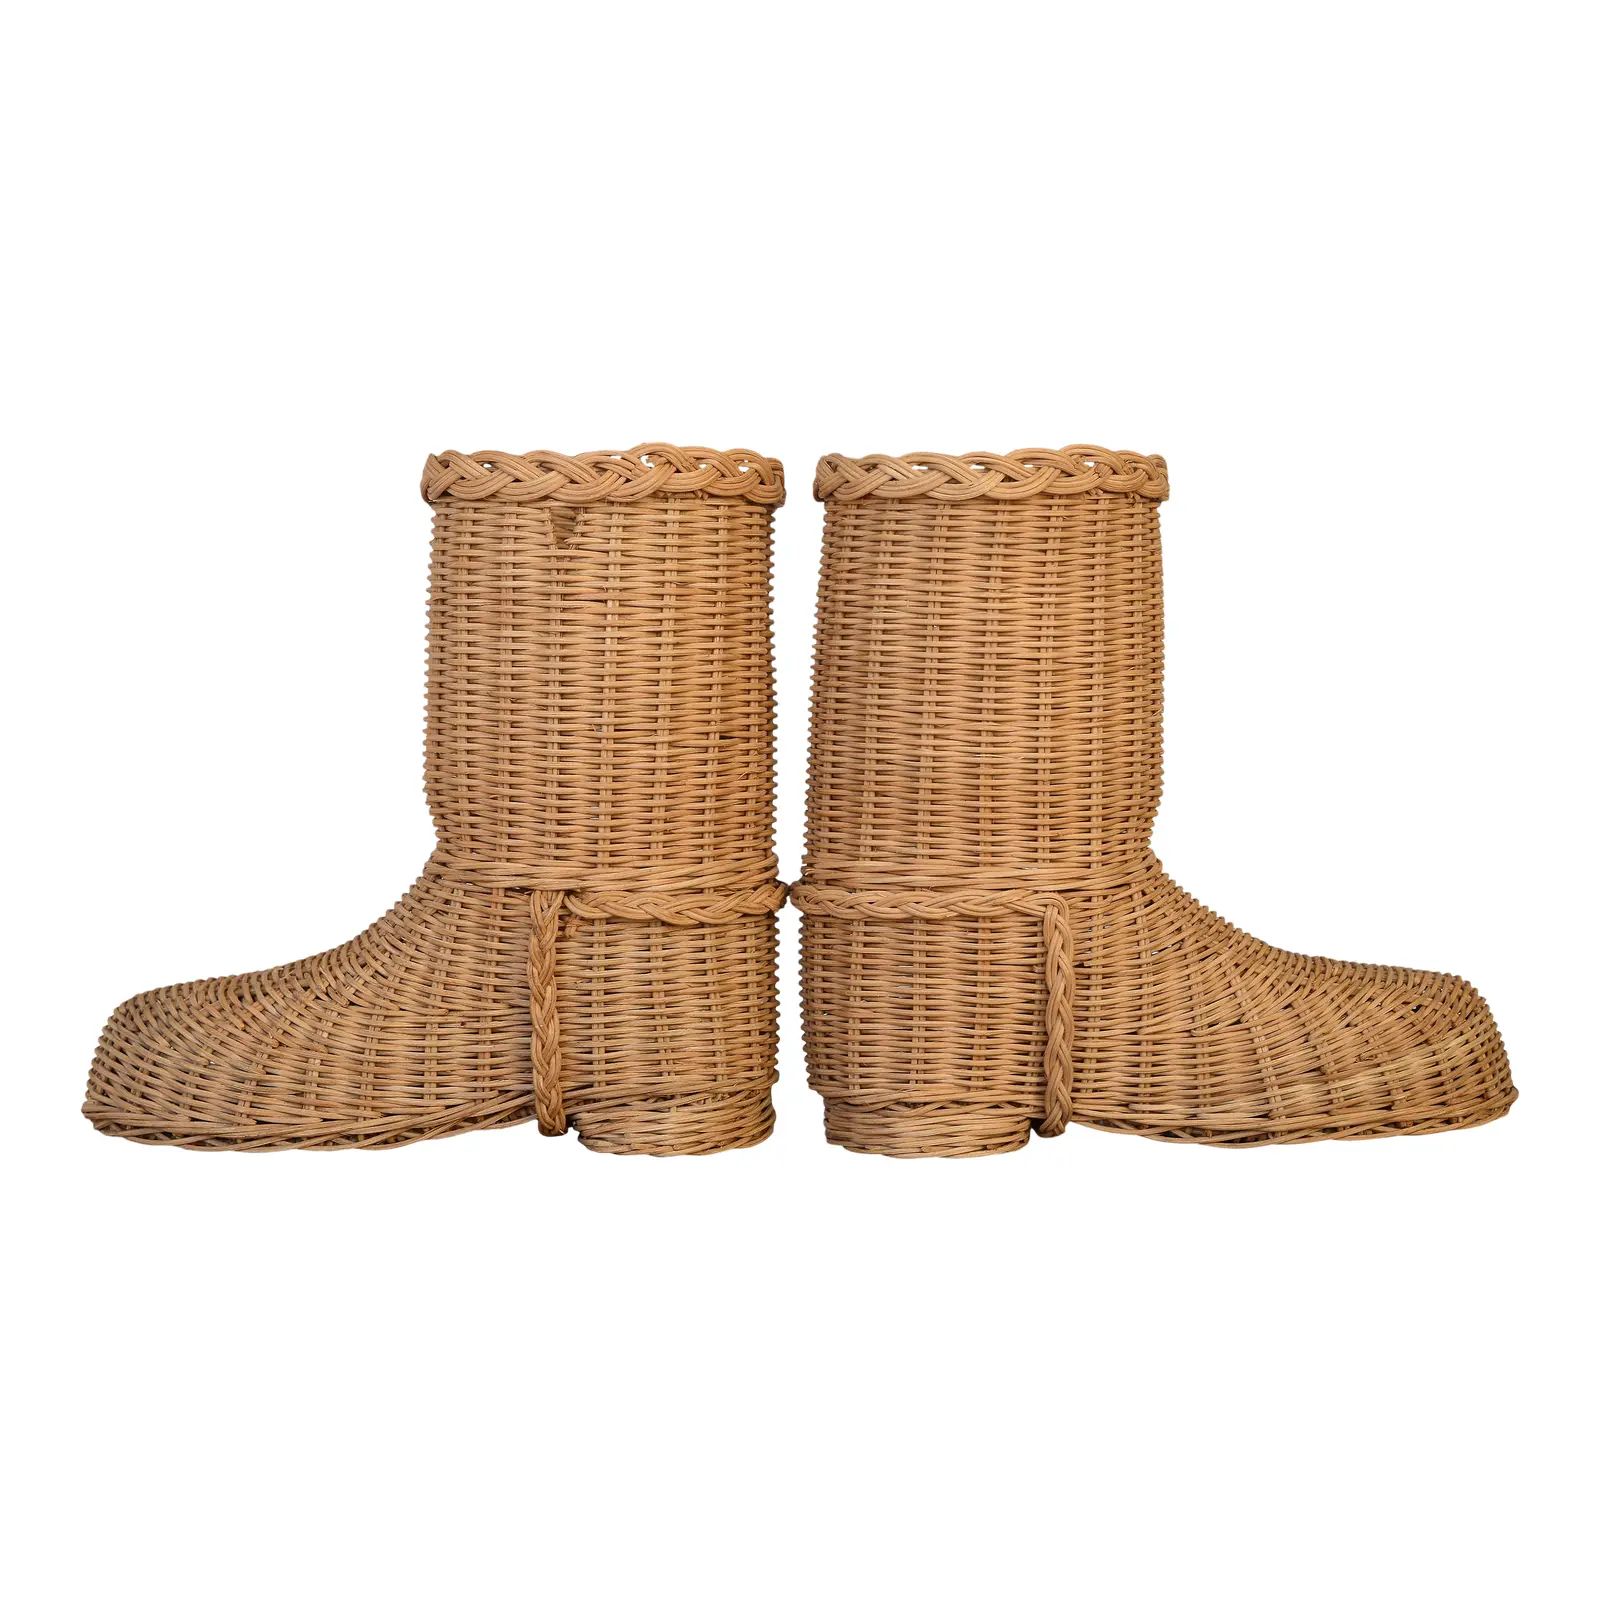 1970s Decorative Wicker Boots Shoes - a Pair | Chairish